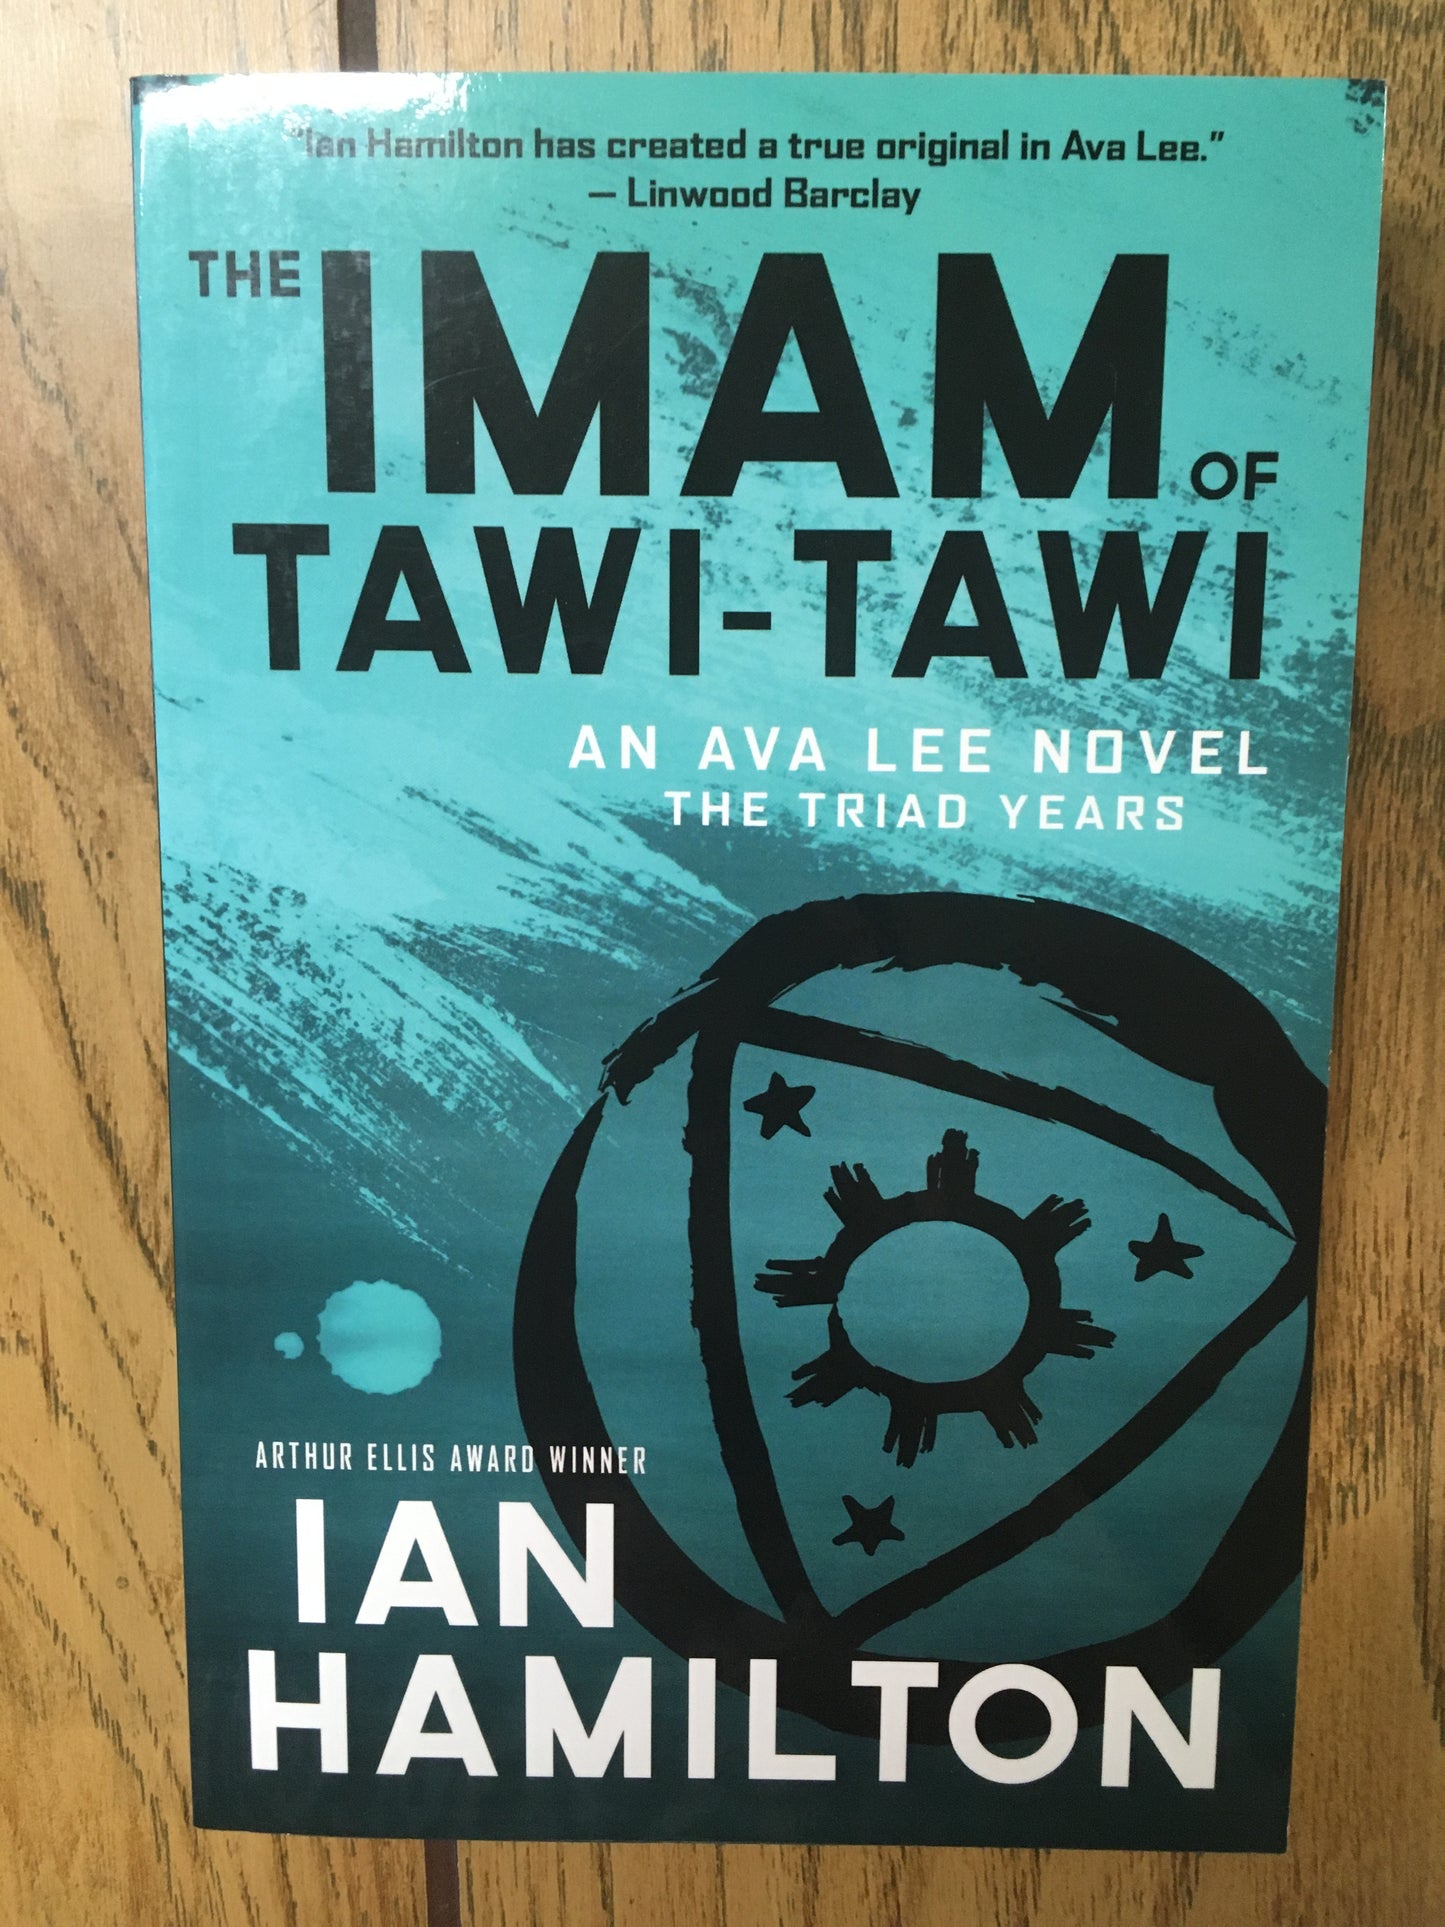 The Imam of Tawi-Tawi (Ava Lee #10)